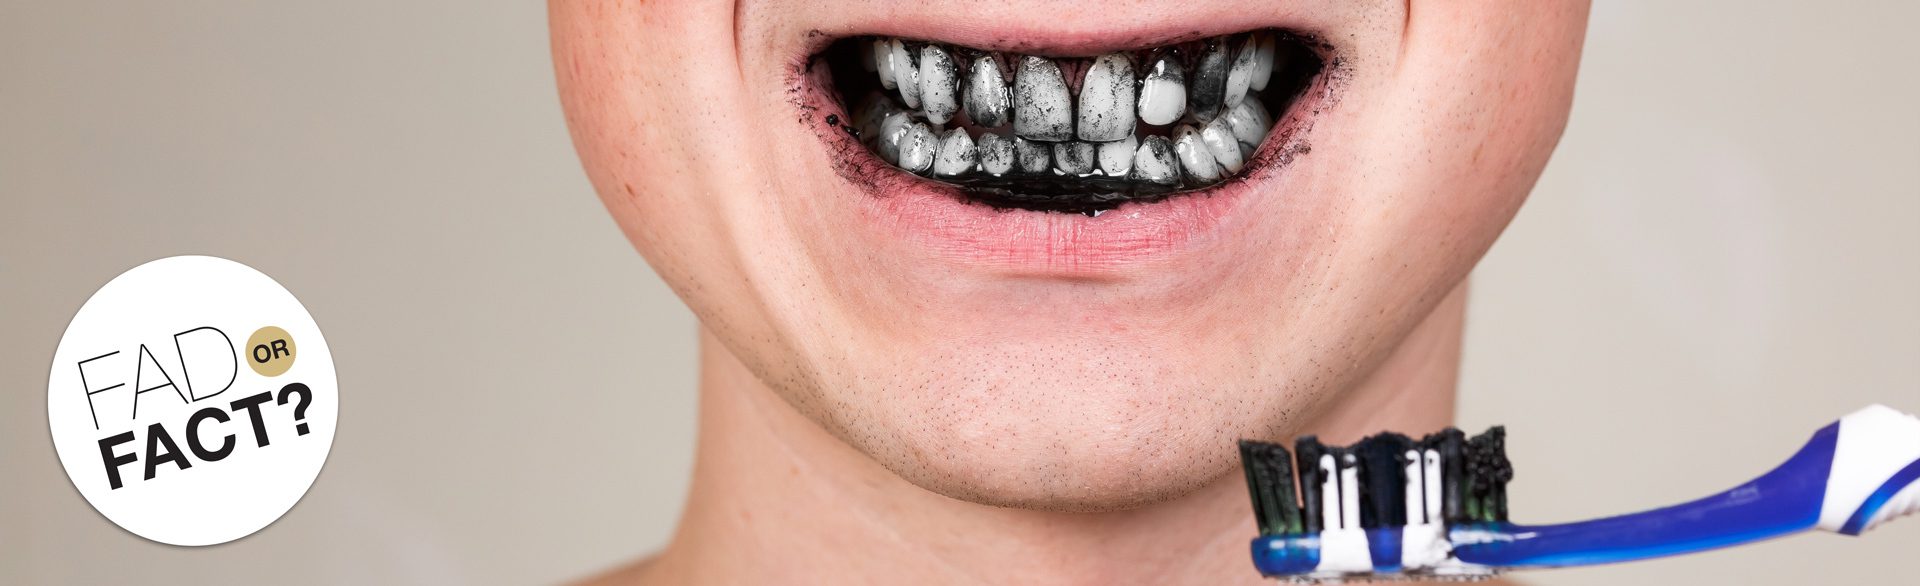 charcoal toothpaste isn't a good option for braces patients!